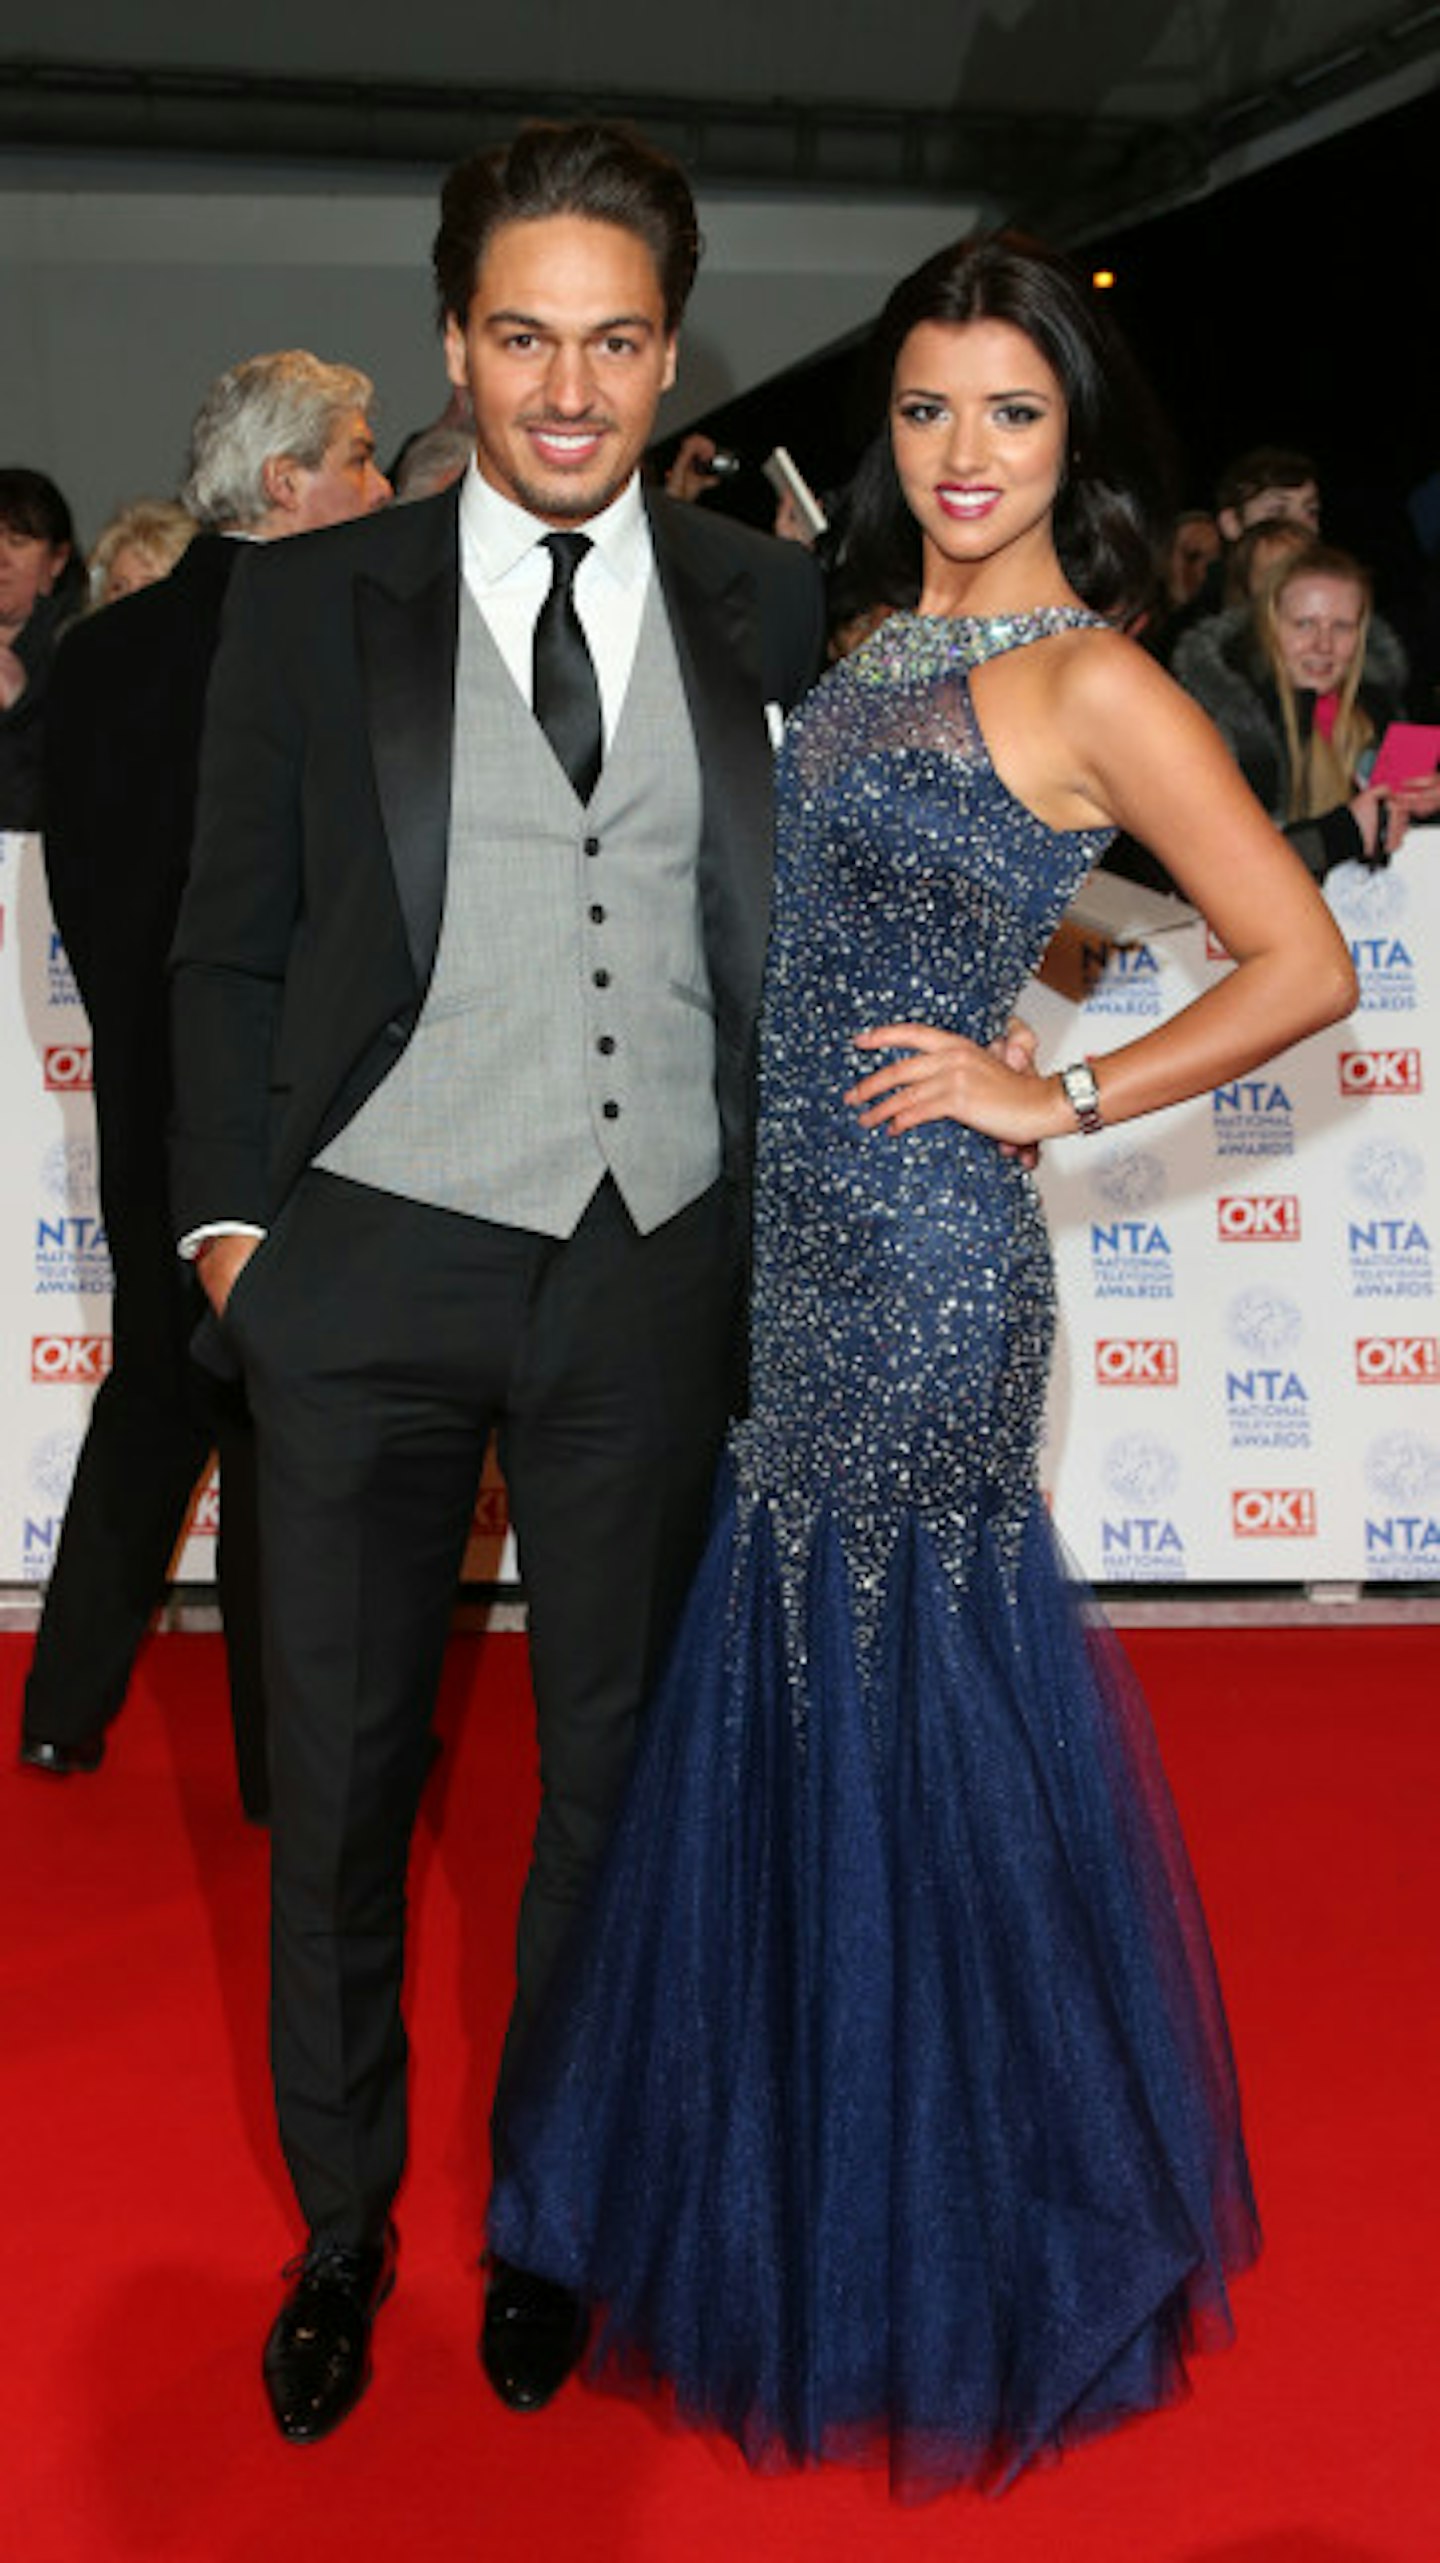 Mario Falcone and Lucy Mecklenburgh